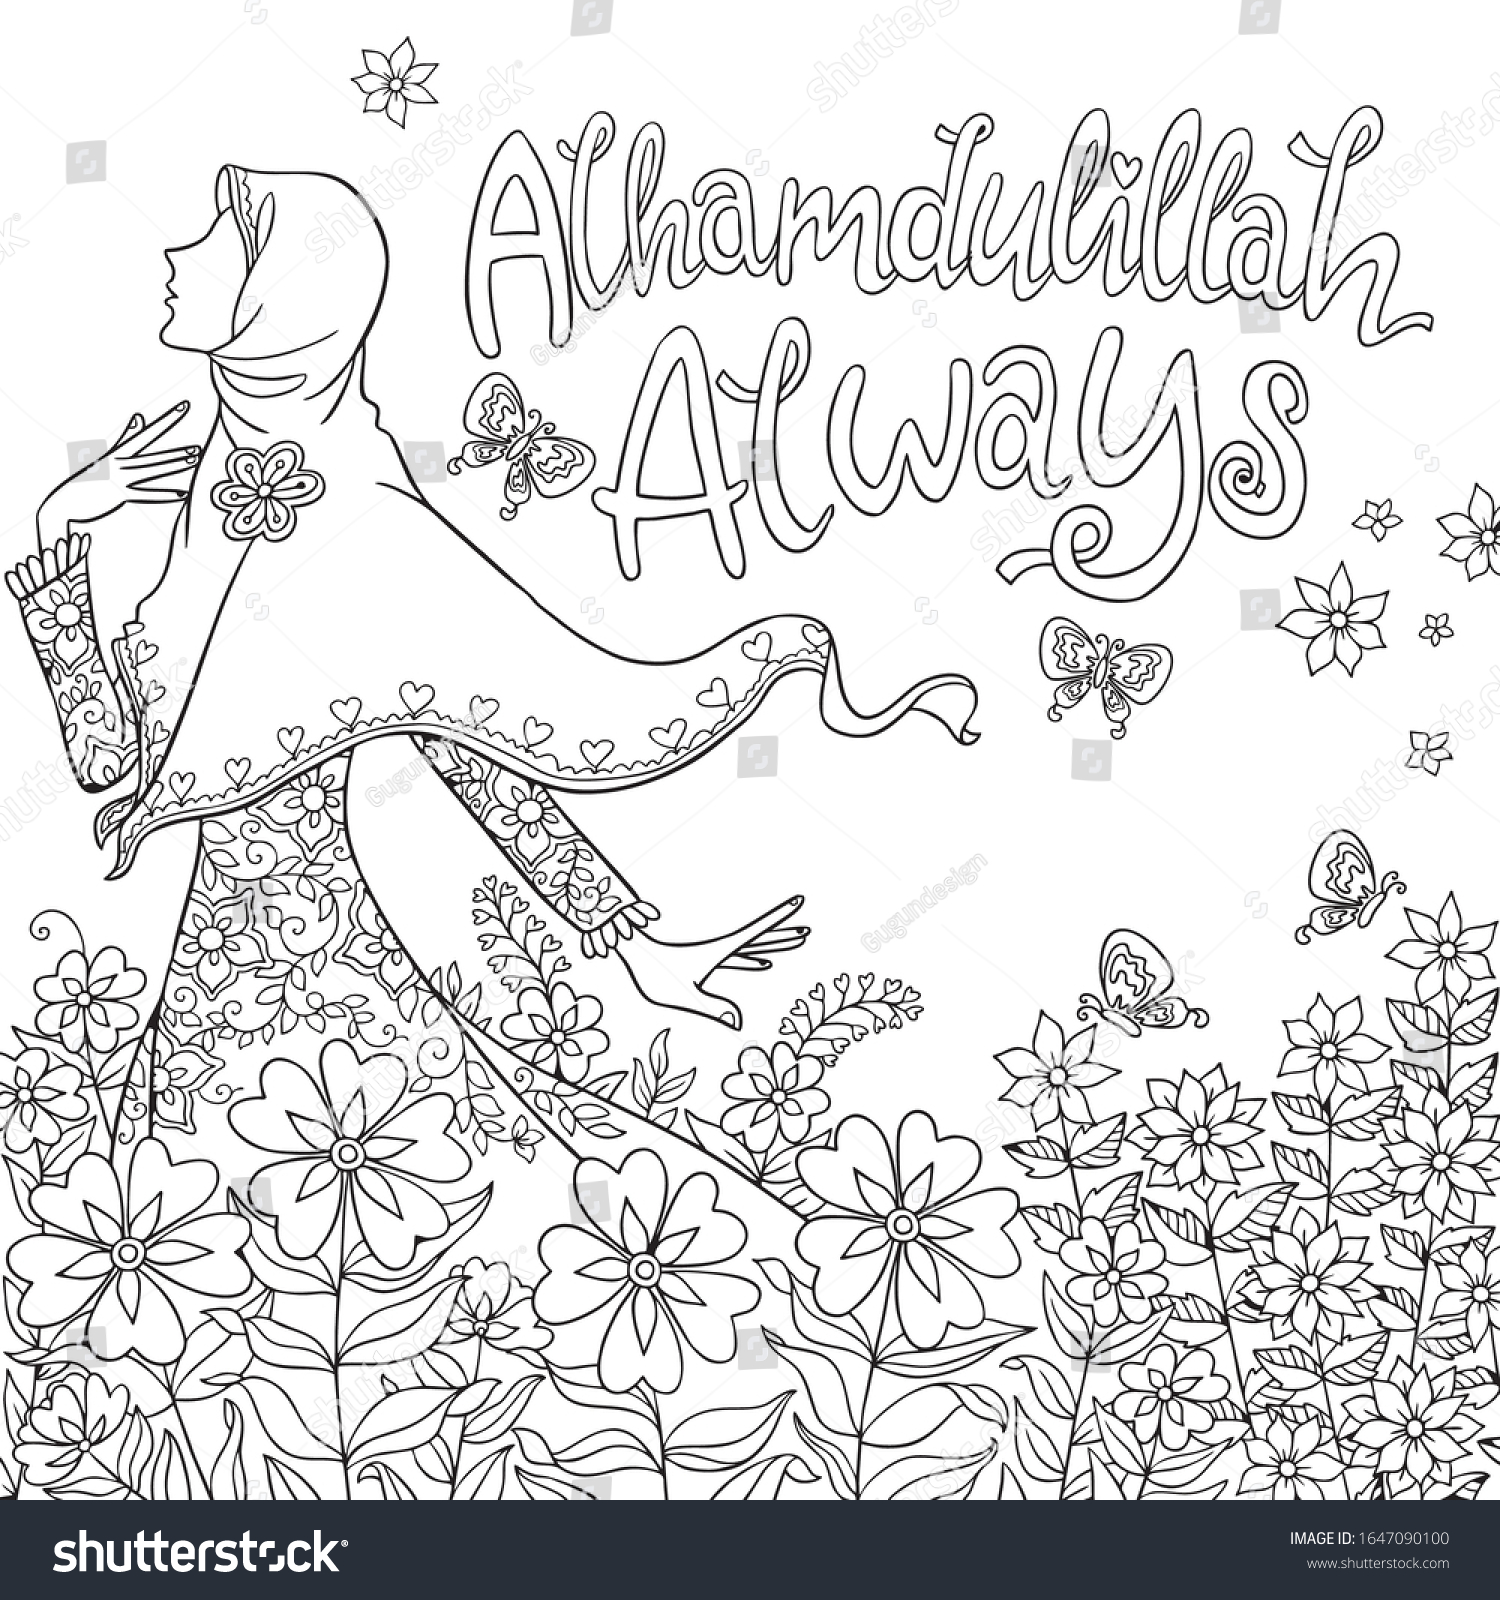 Alhamdulillah Always Islamic Coloring Book Page Stock Vector ...